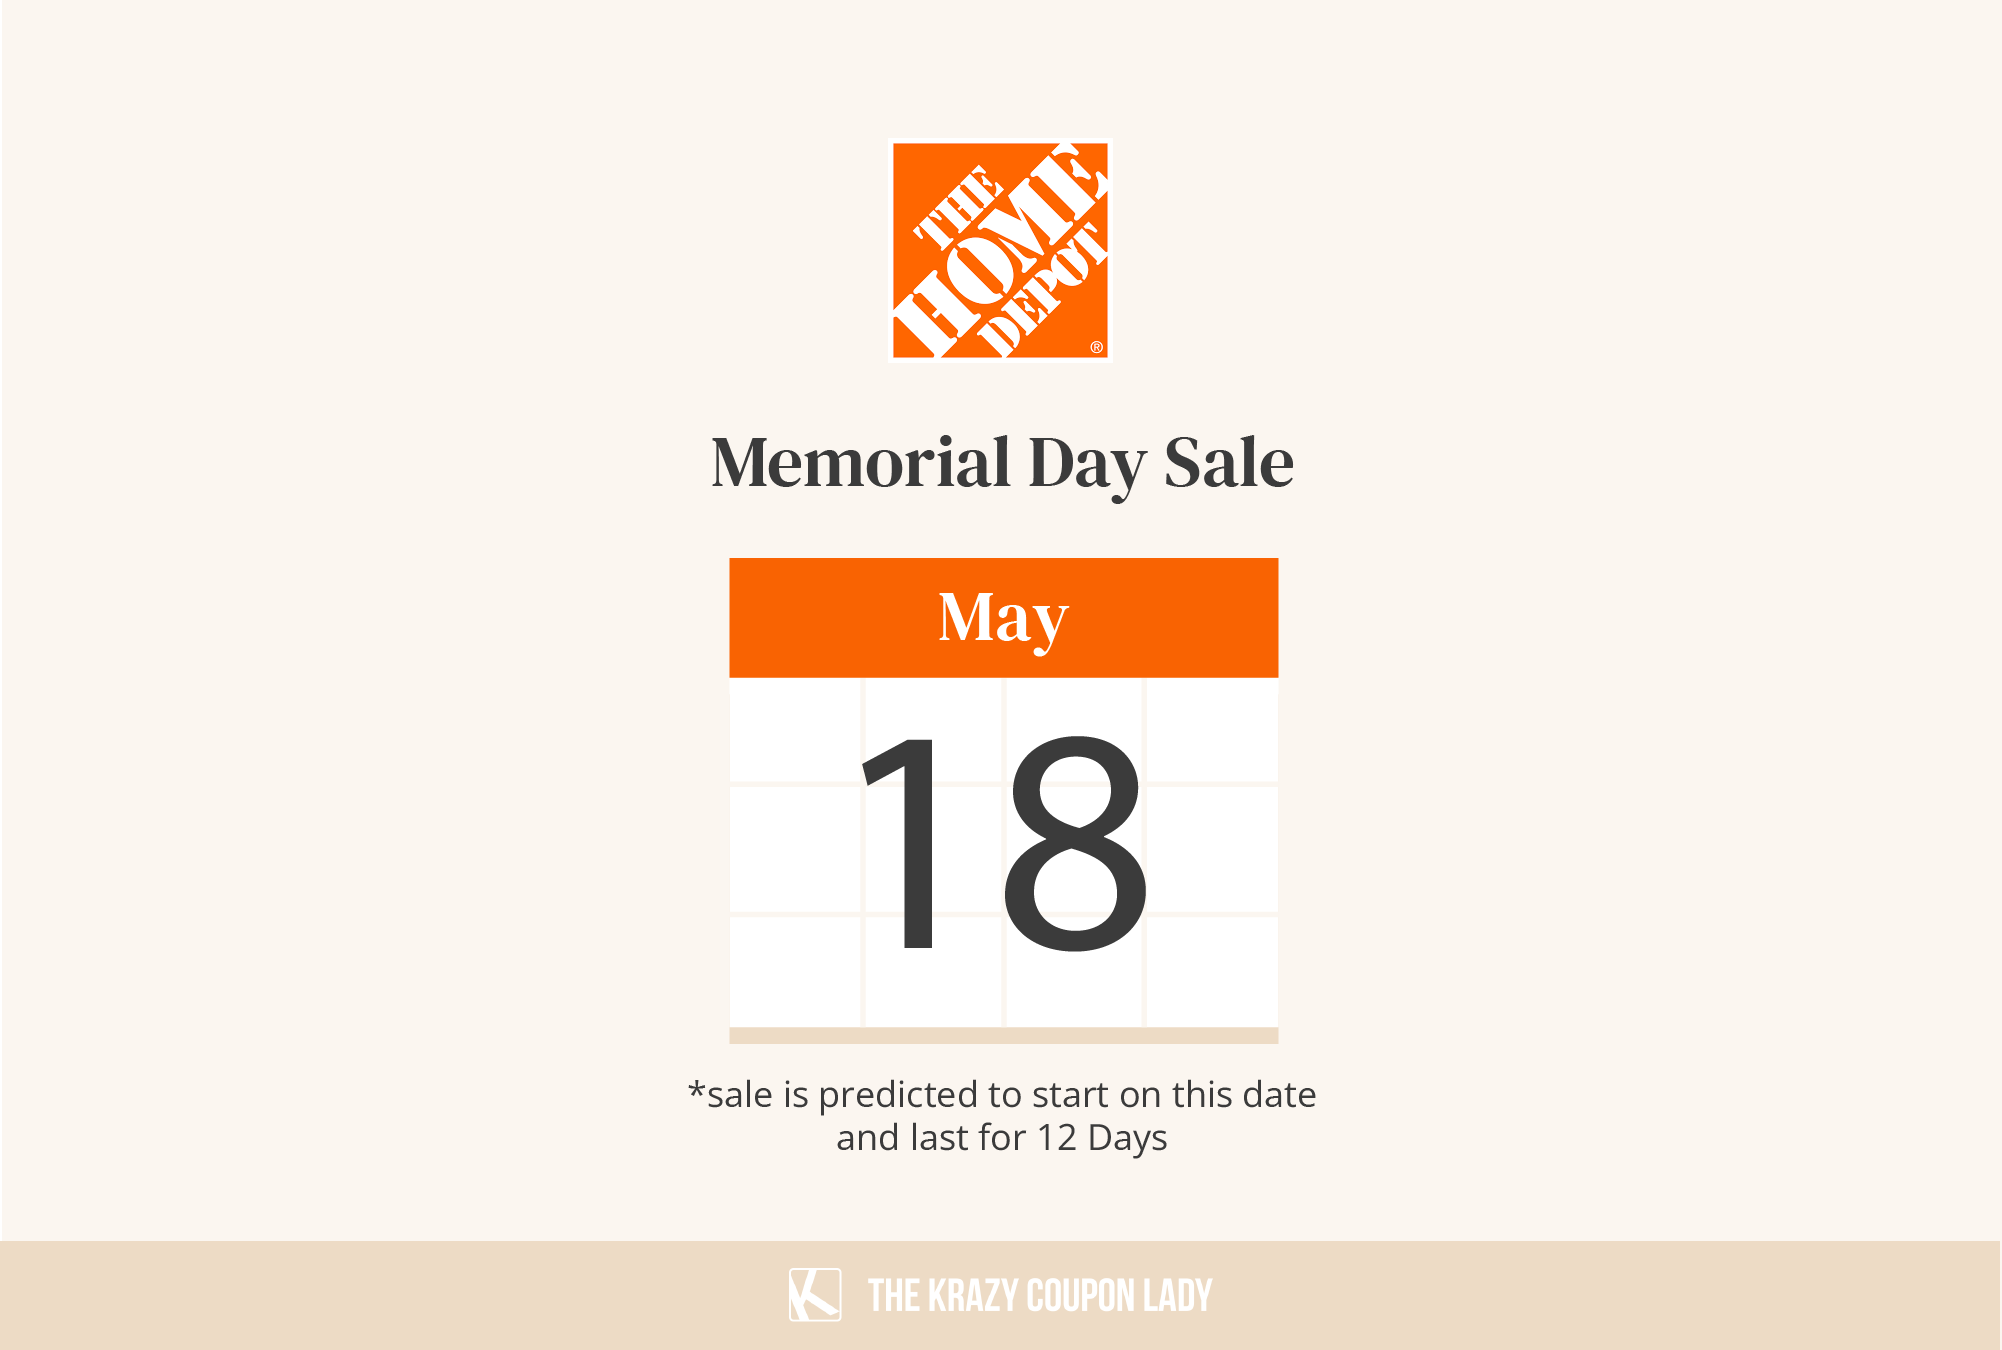 Home Depot Memorial Day sale